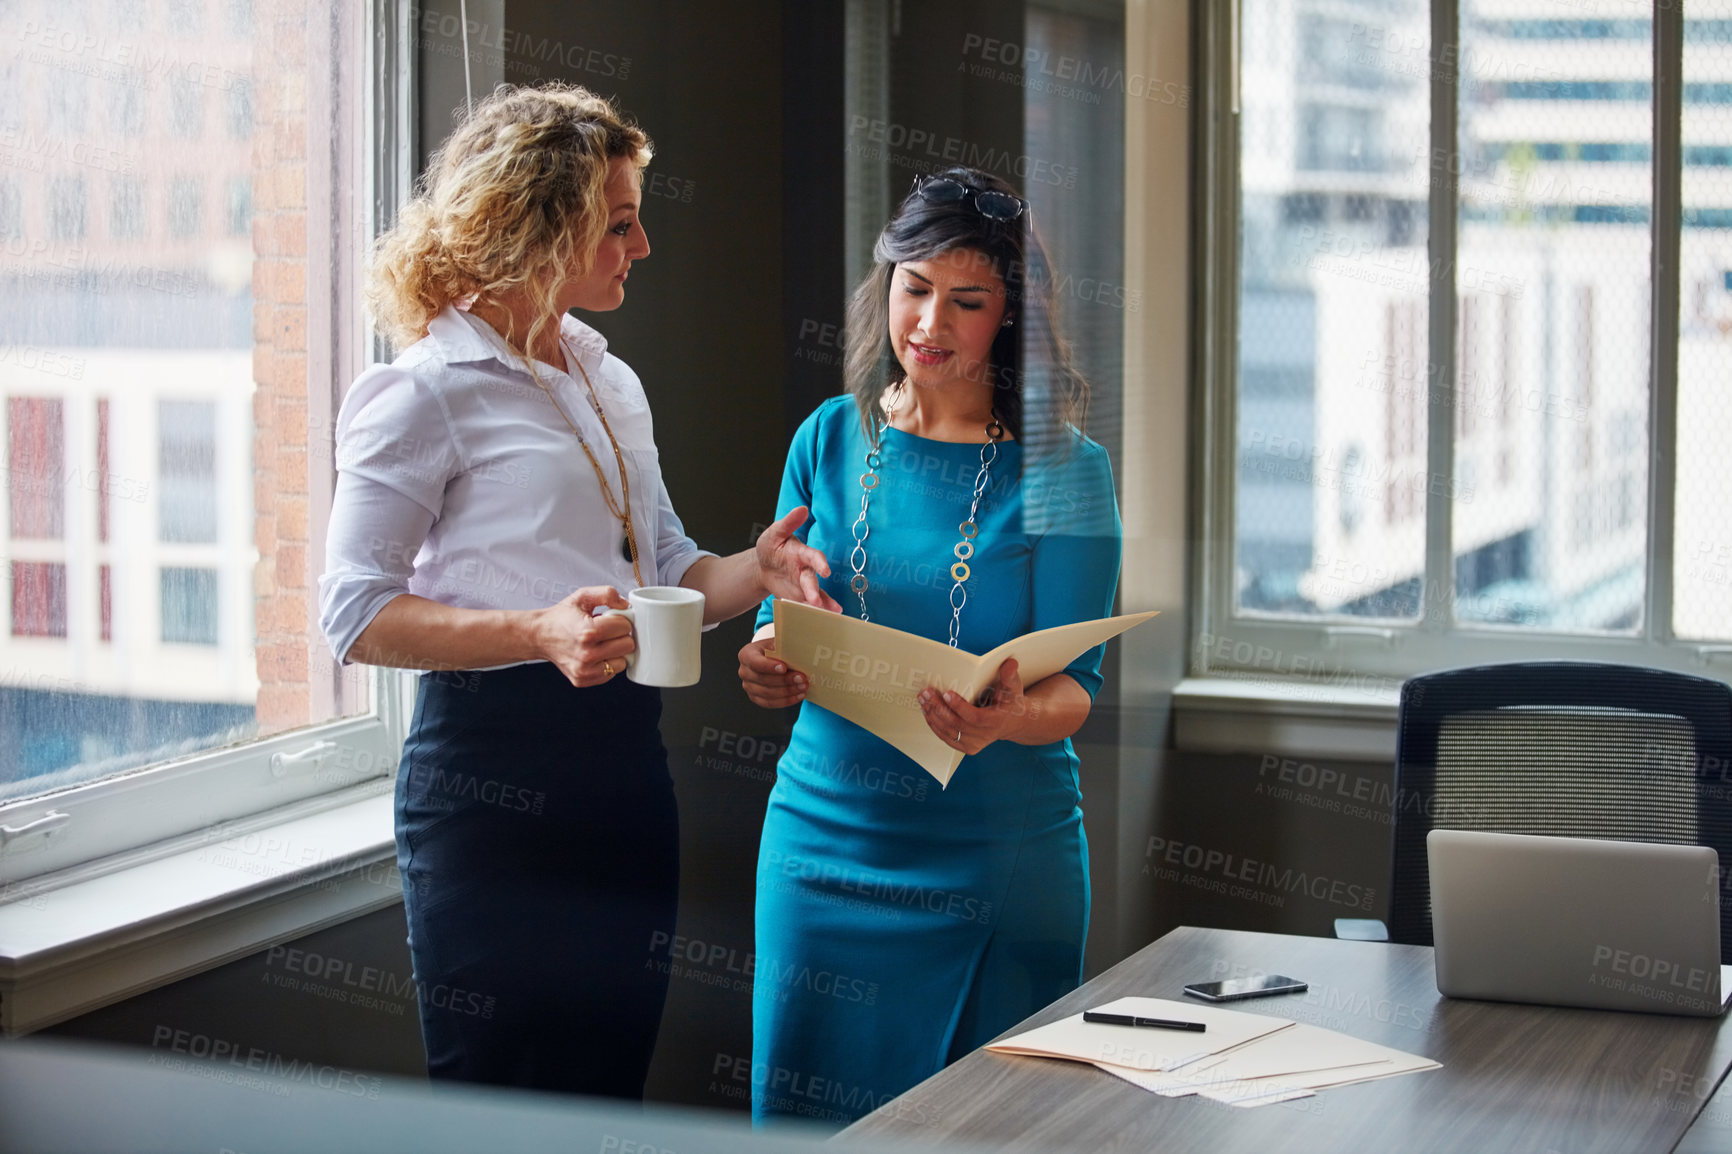 Buy stock photo Shot of two businesswomen going over paperwork together in an office